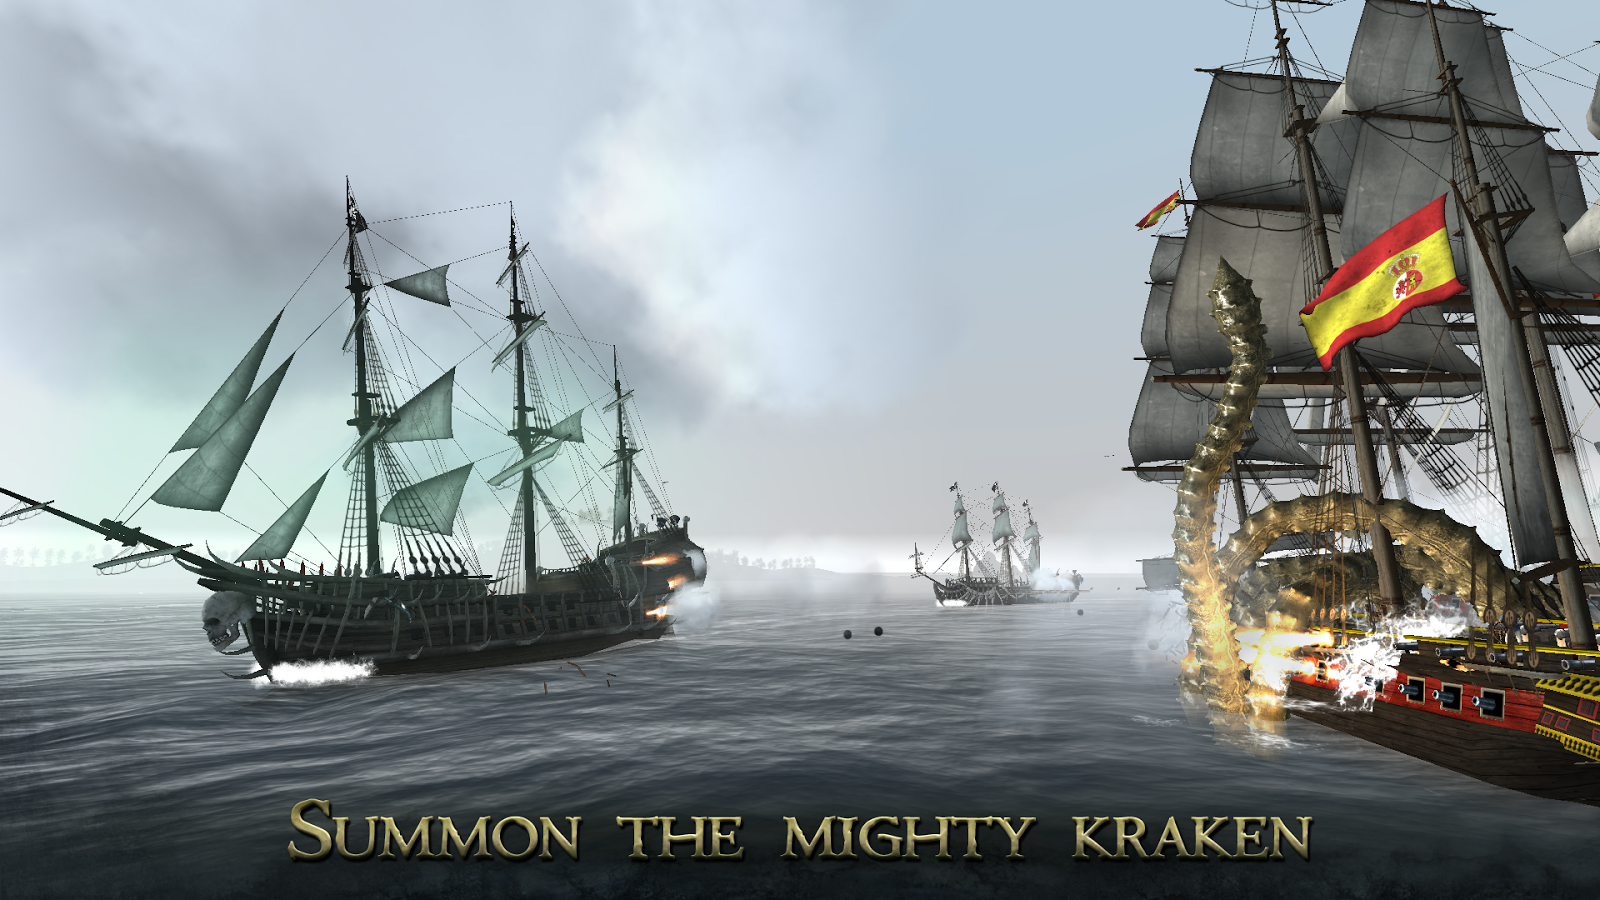 The Pirate Plague of the Dead MOD APK terbaru Latest Version Free Download The Pirate: Plague of the Dead MOD APK v2.5 (Unlimited Money/Kit/Unlocked)